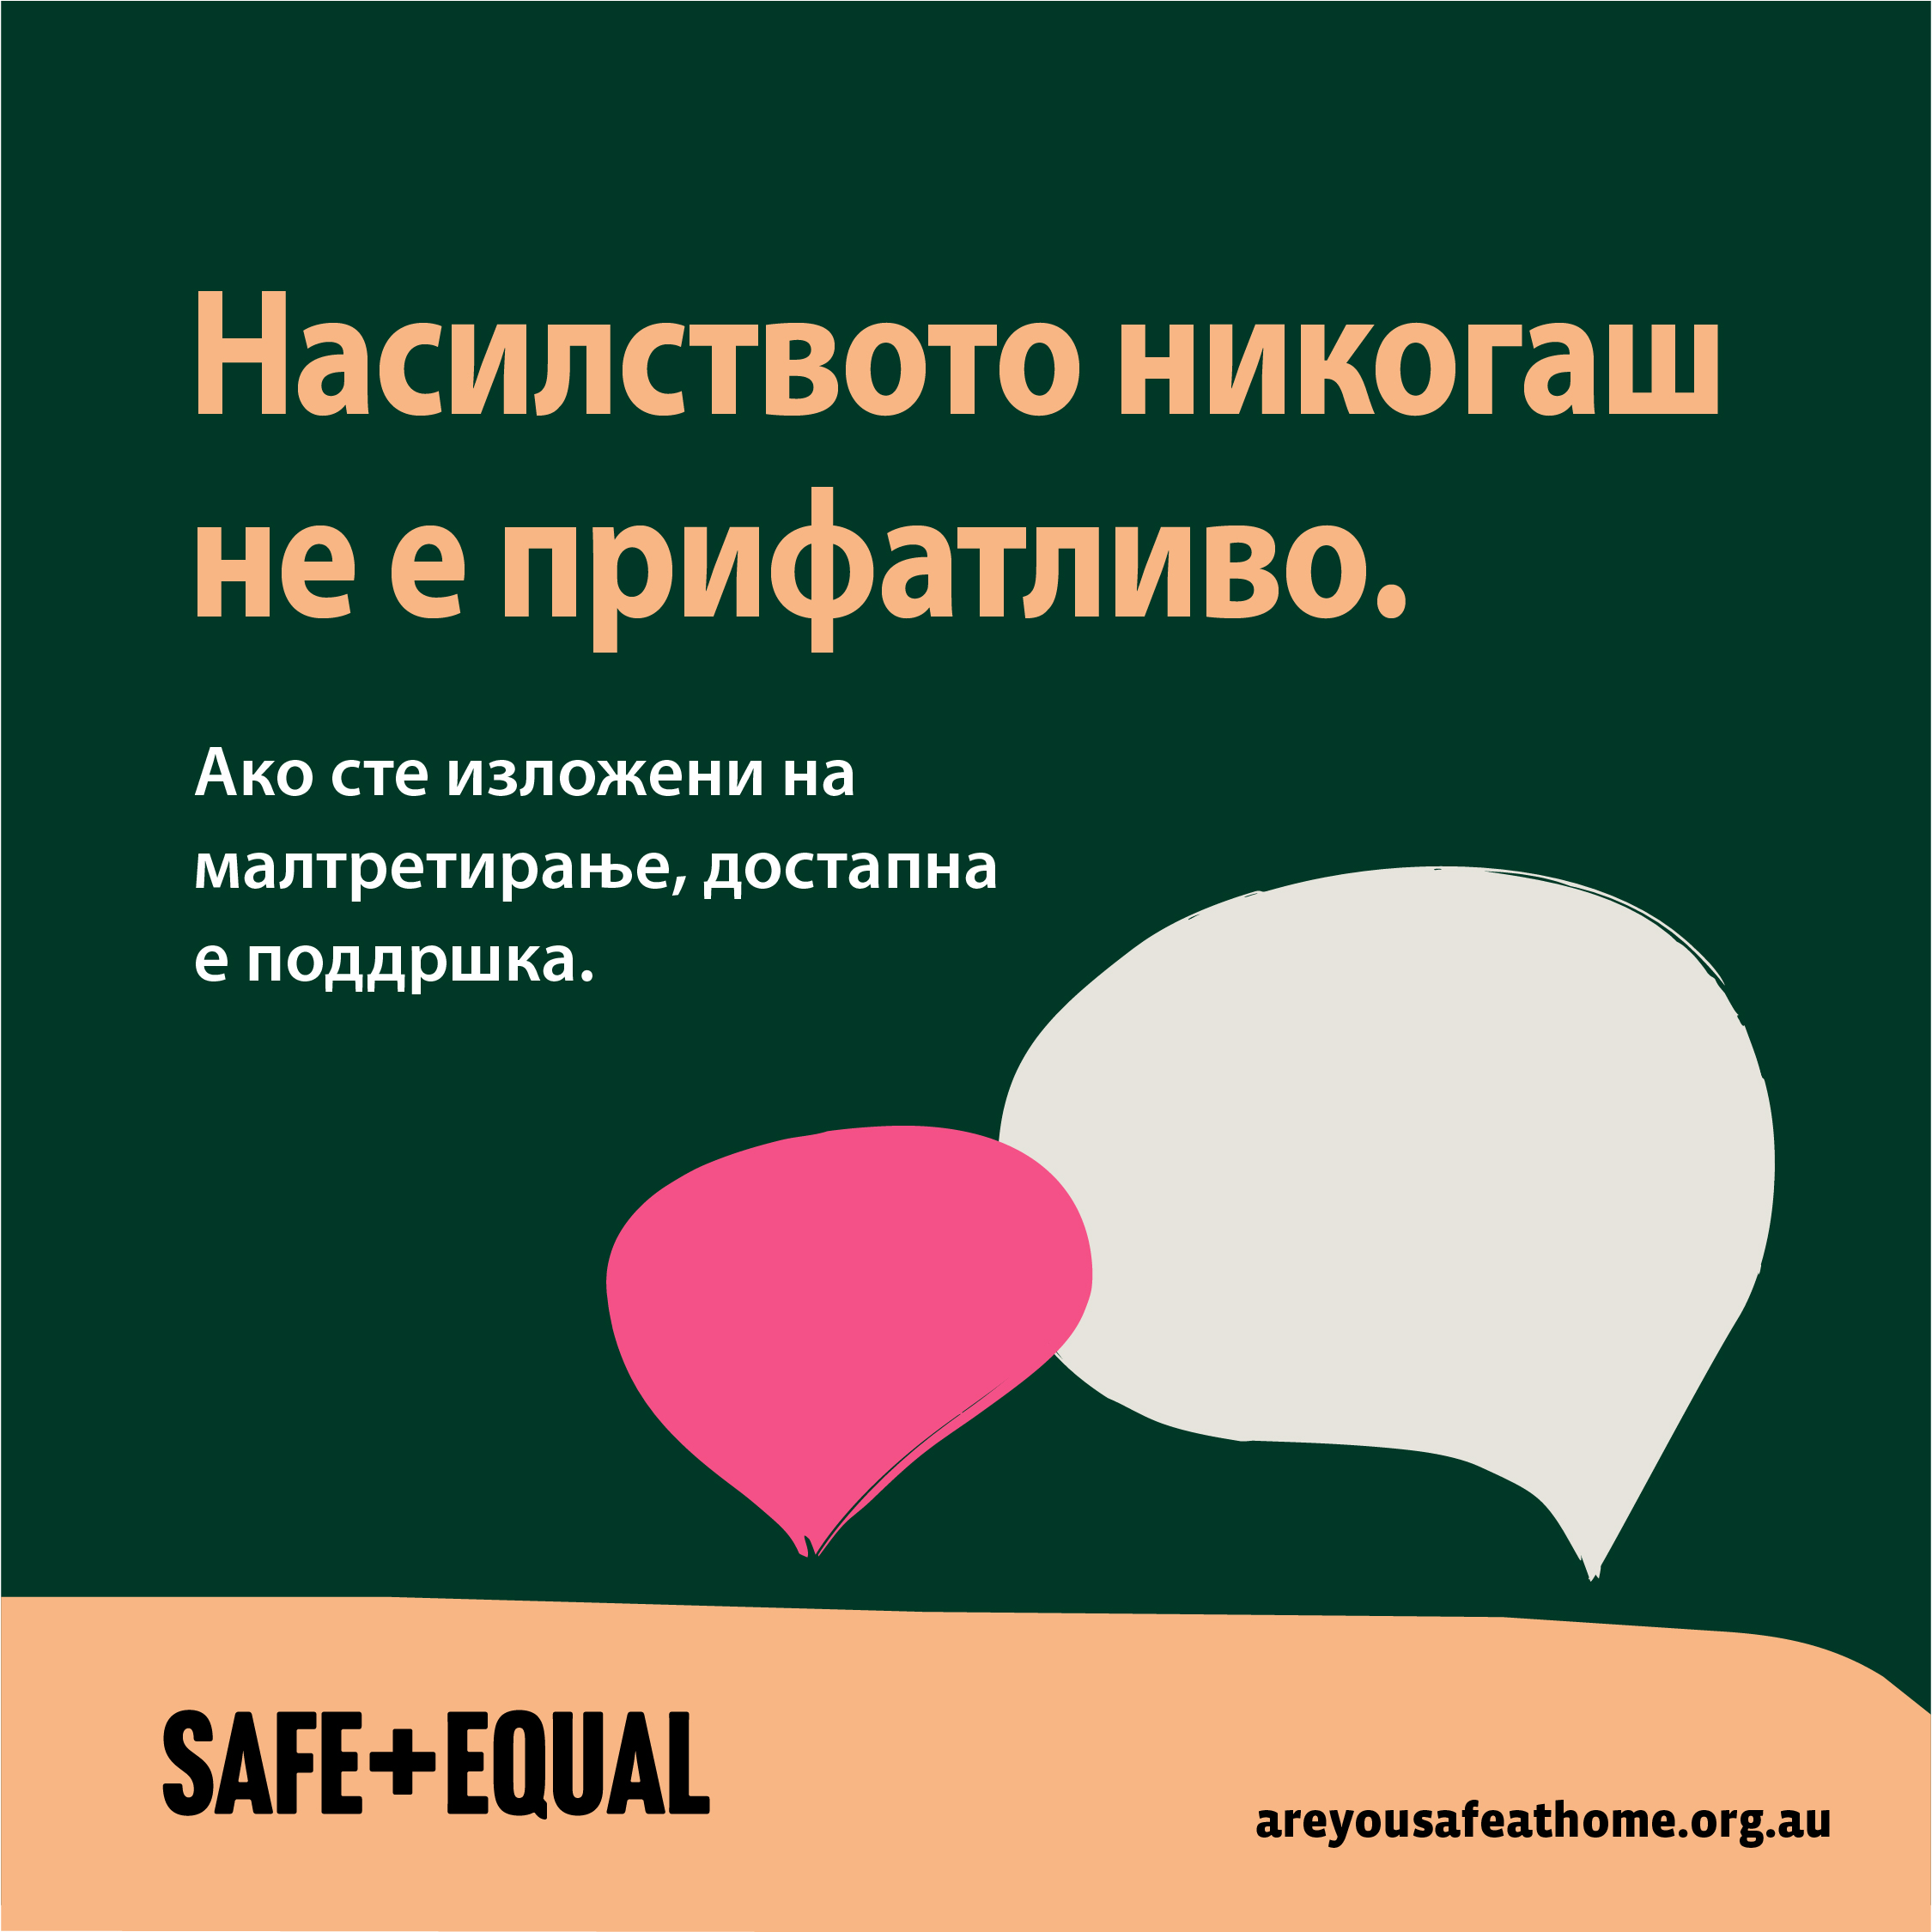 Social media tile for Are you safe at home translated into Macedonian